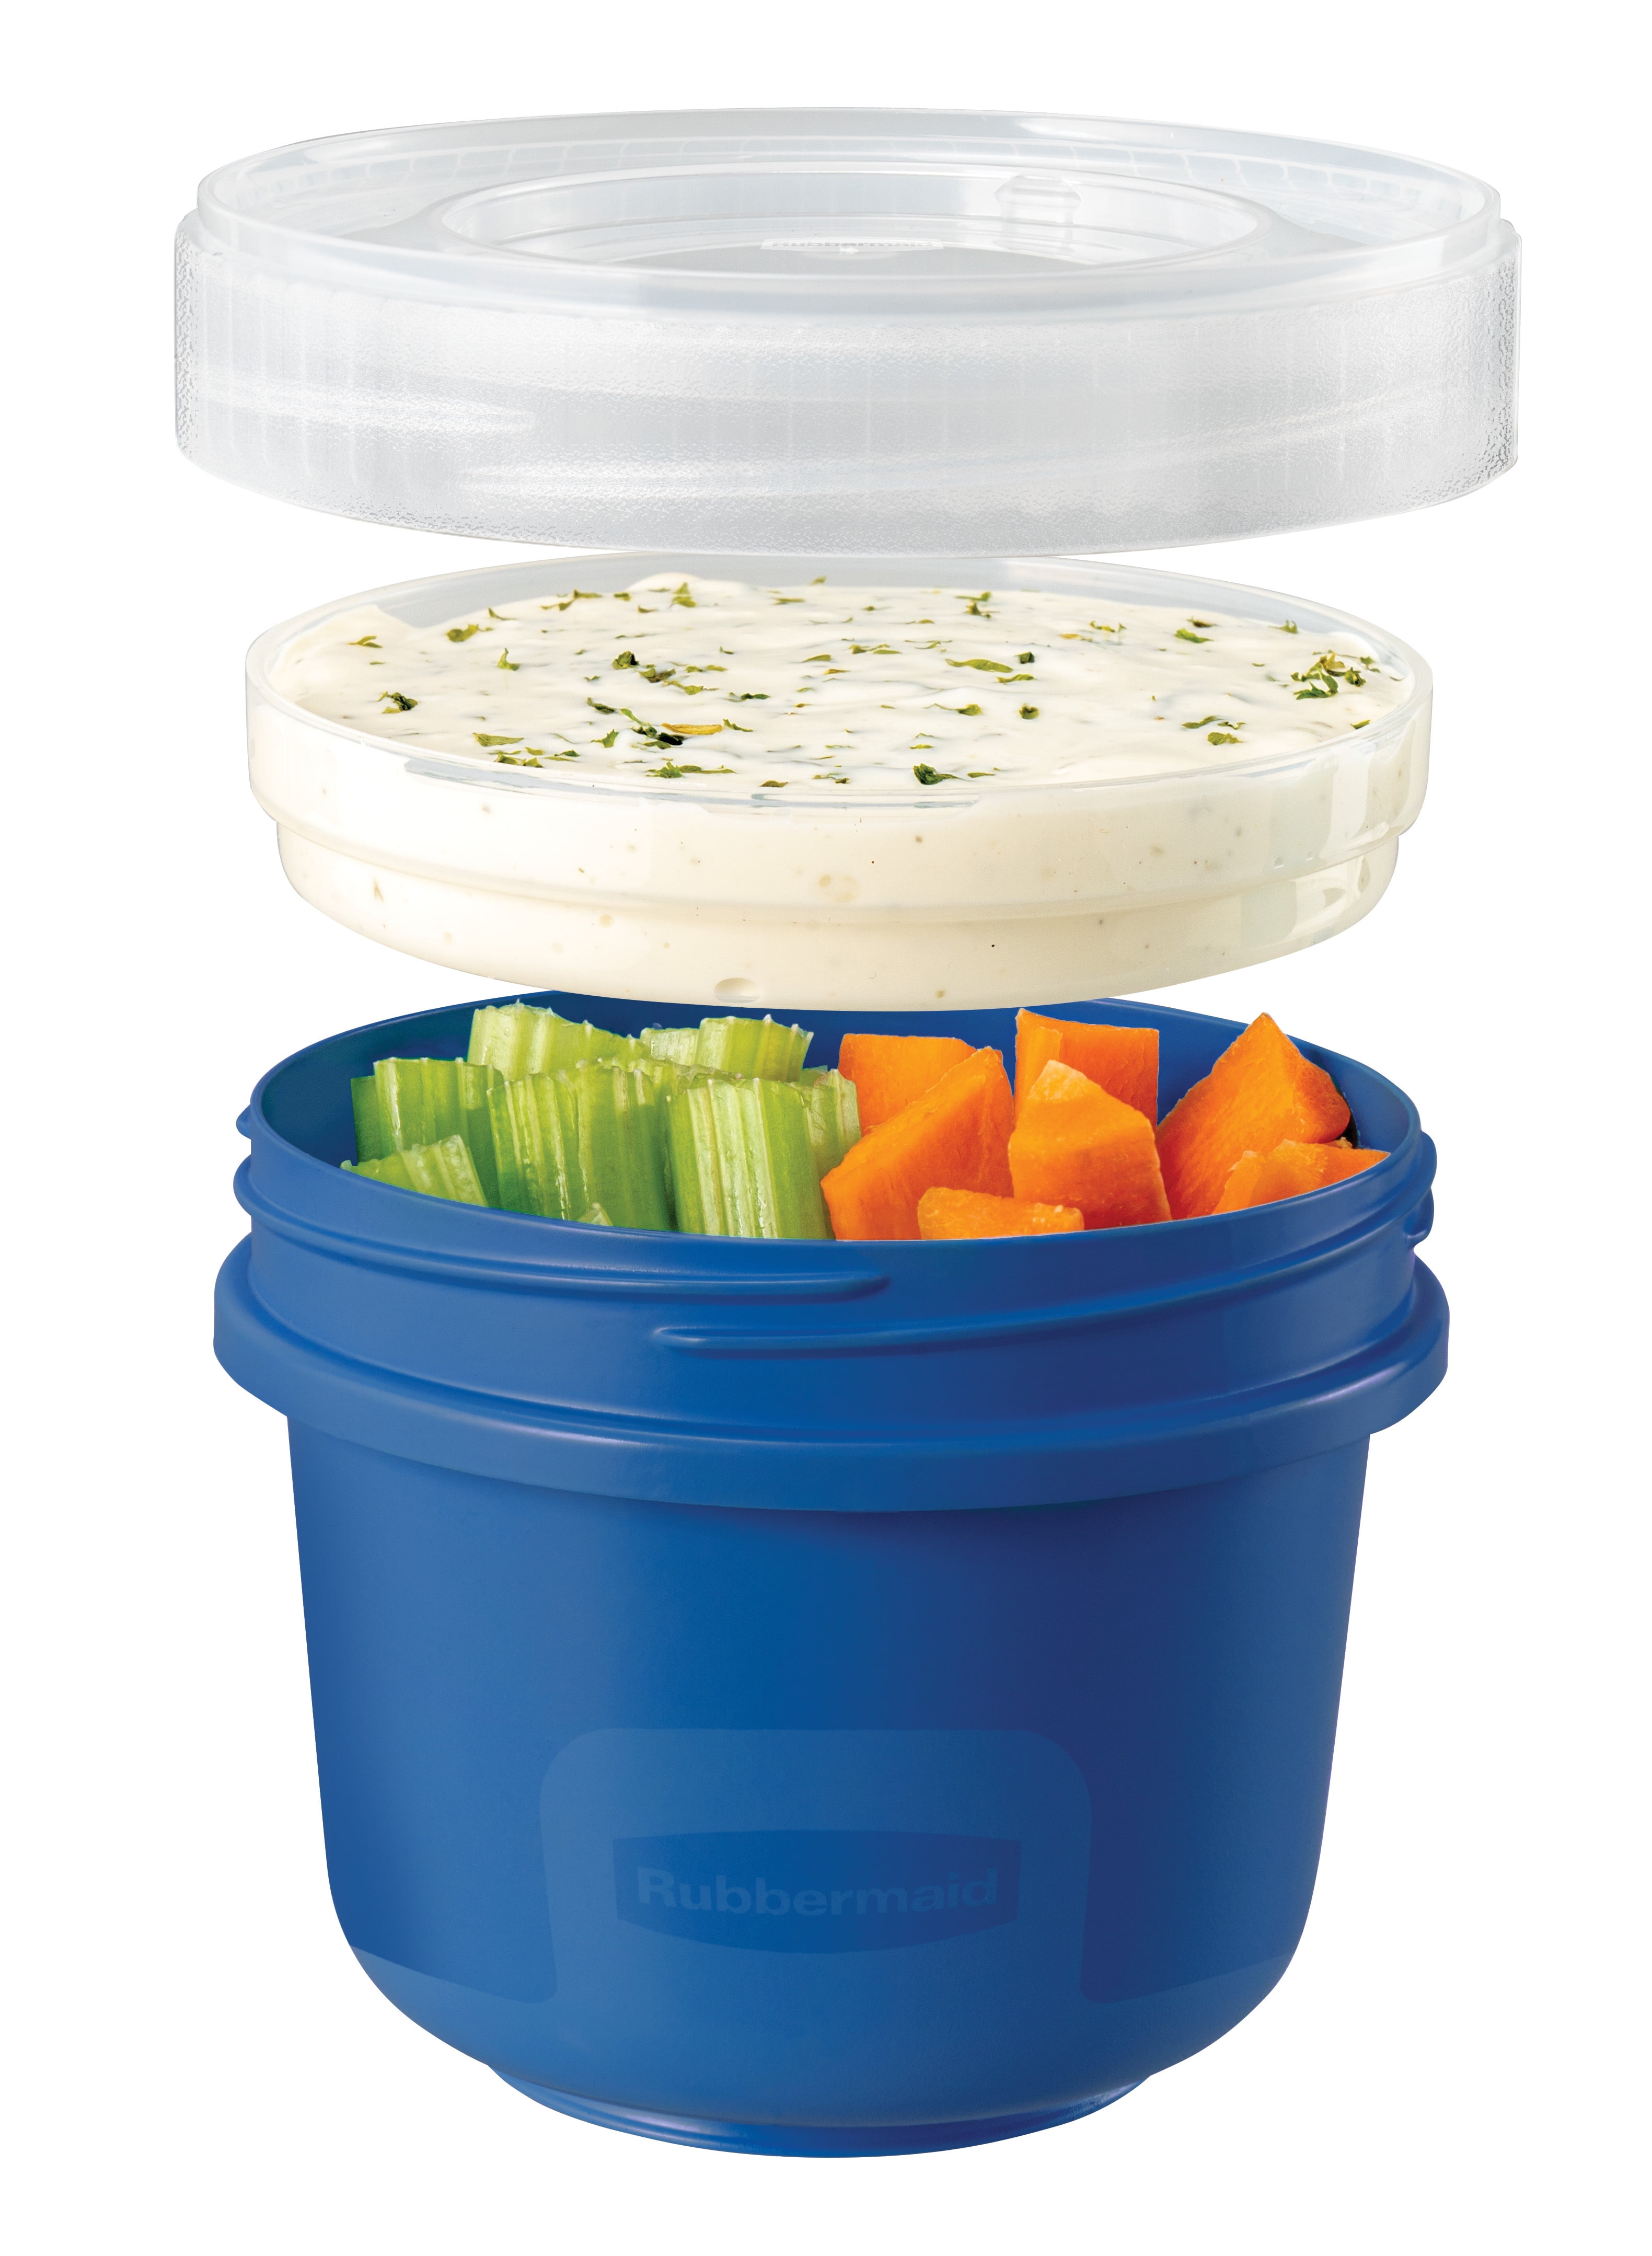 Rubbermaid Take Alongs Containers + Lids Rectangles With Quik Clik Seal  Large 1 Gallon - 2 Count - Tom Thumb